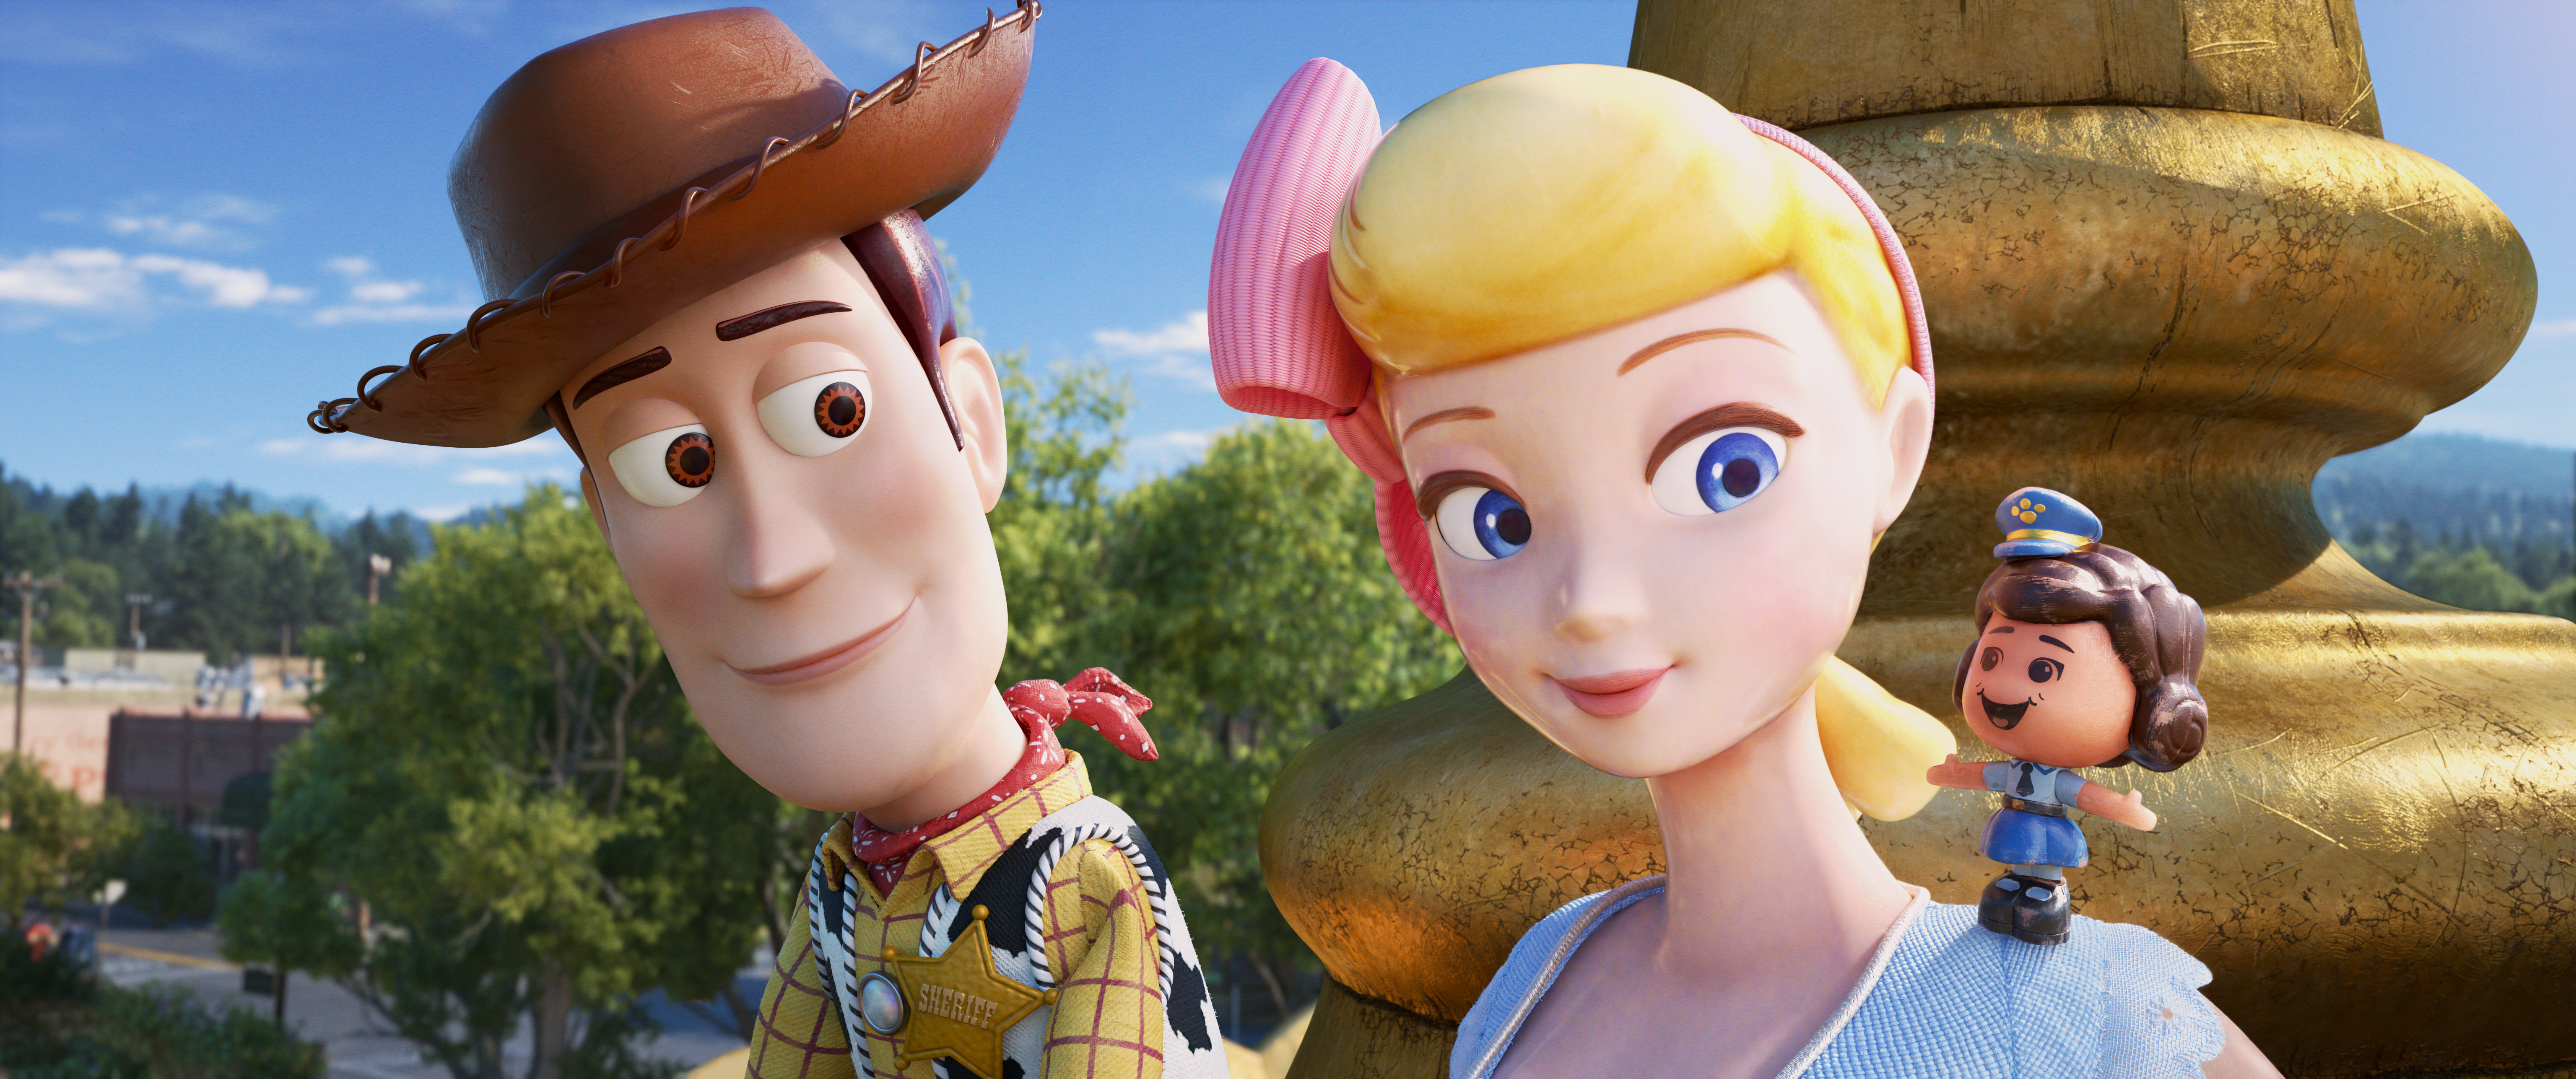 Toy Story 4 Review Rotten TOmatoes